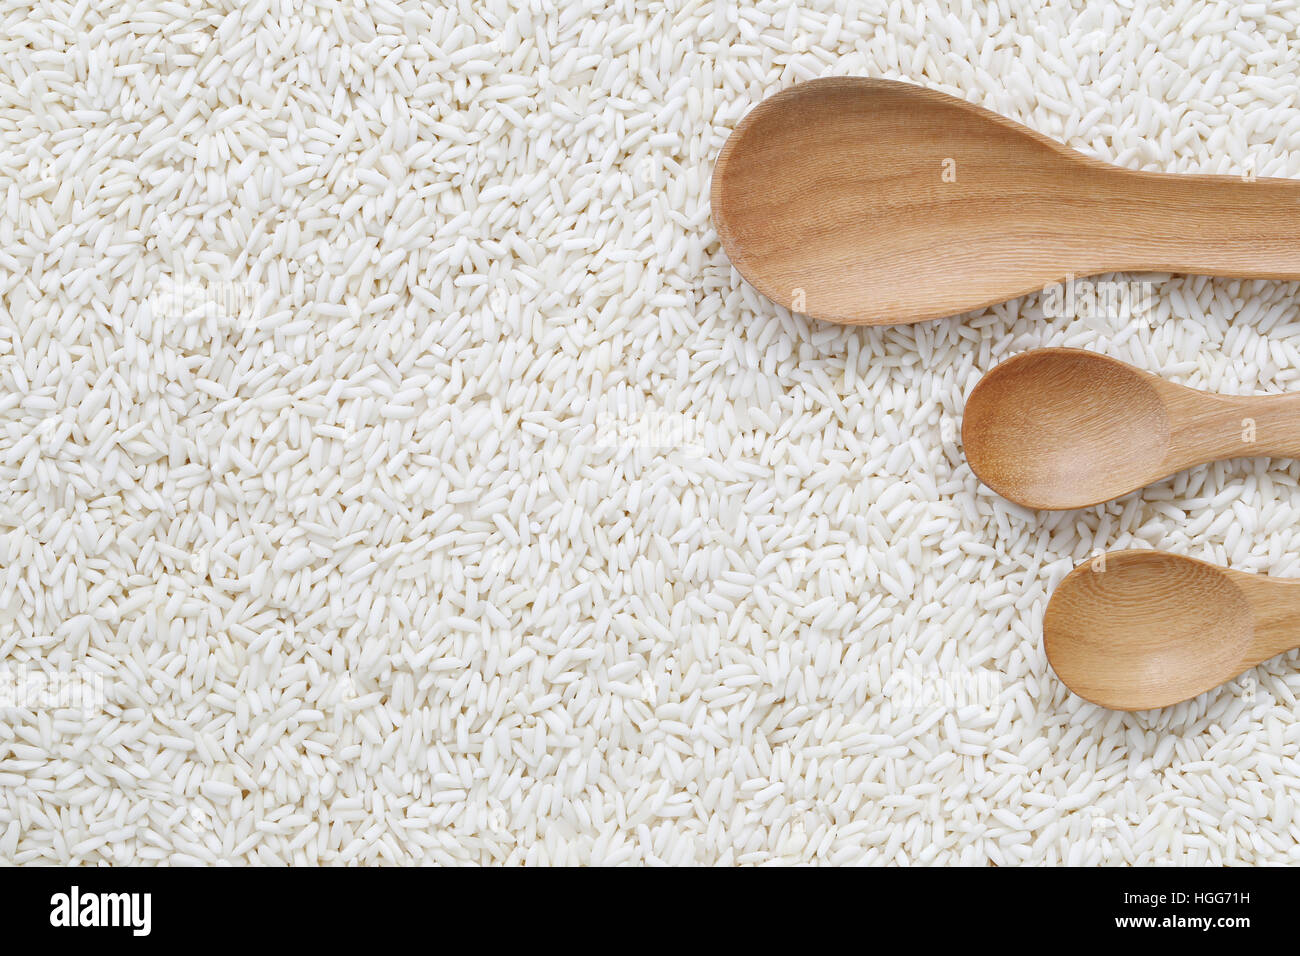 Wooden spoon of empty on organic white rice, glutinous rice or sticky rice for design nature foods concept. Stock Photo